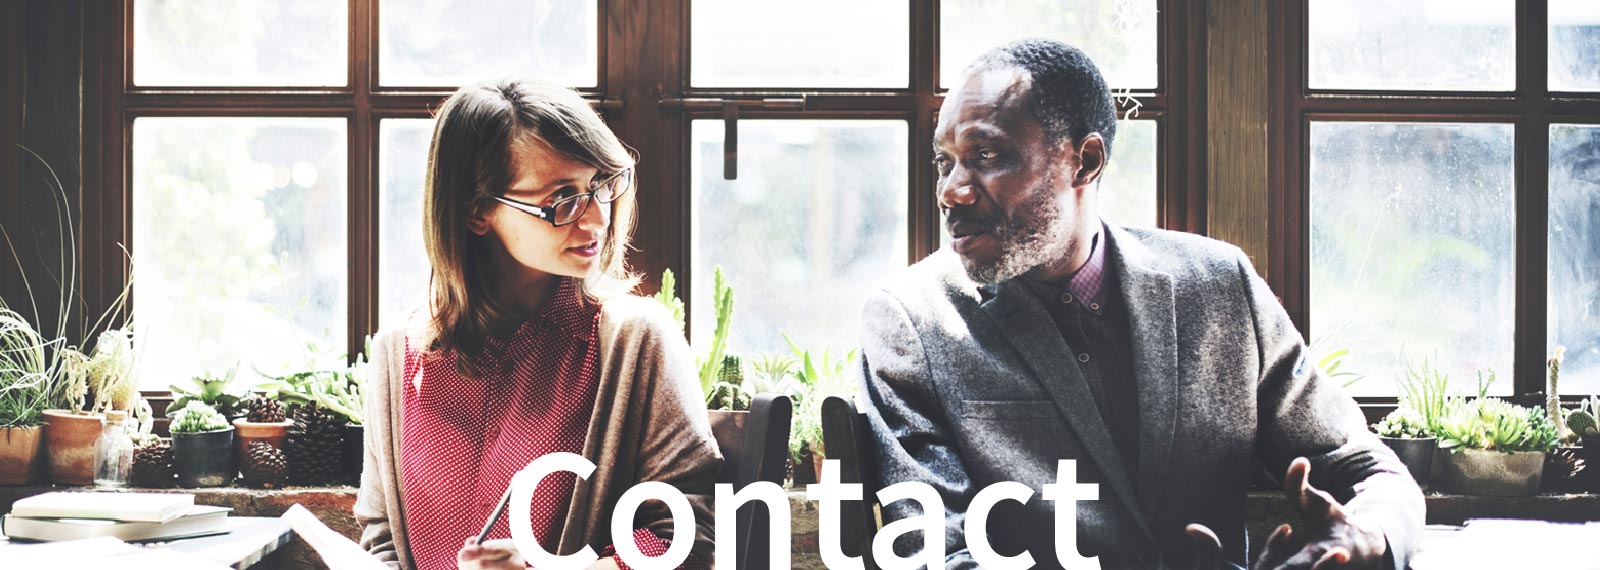 banner for Contact page, 2 individuals chatting in a warmly lit space